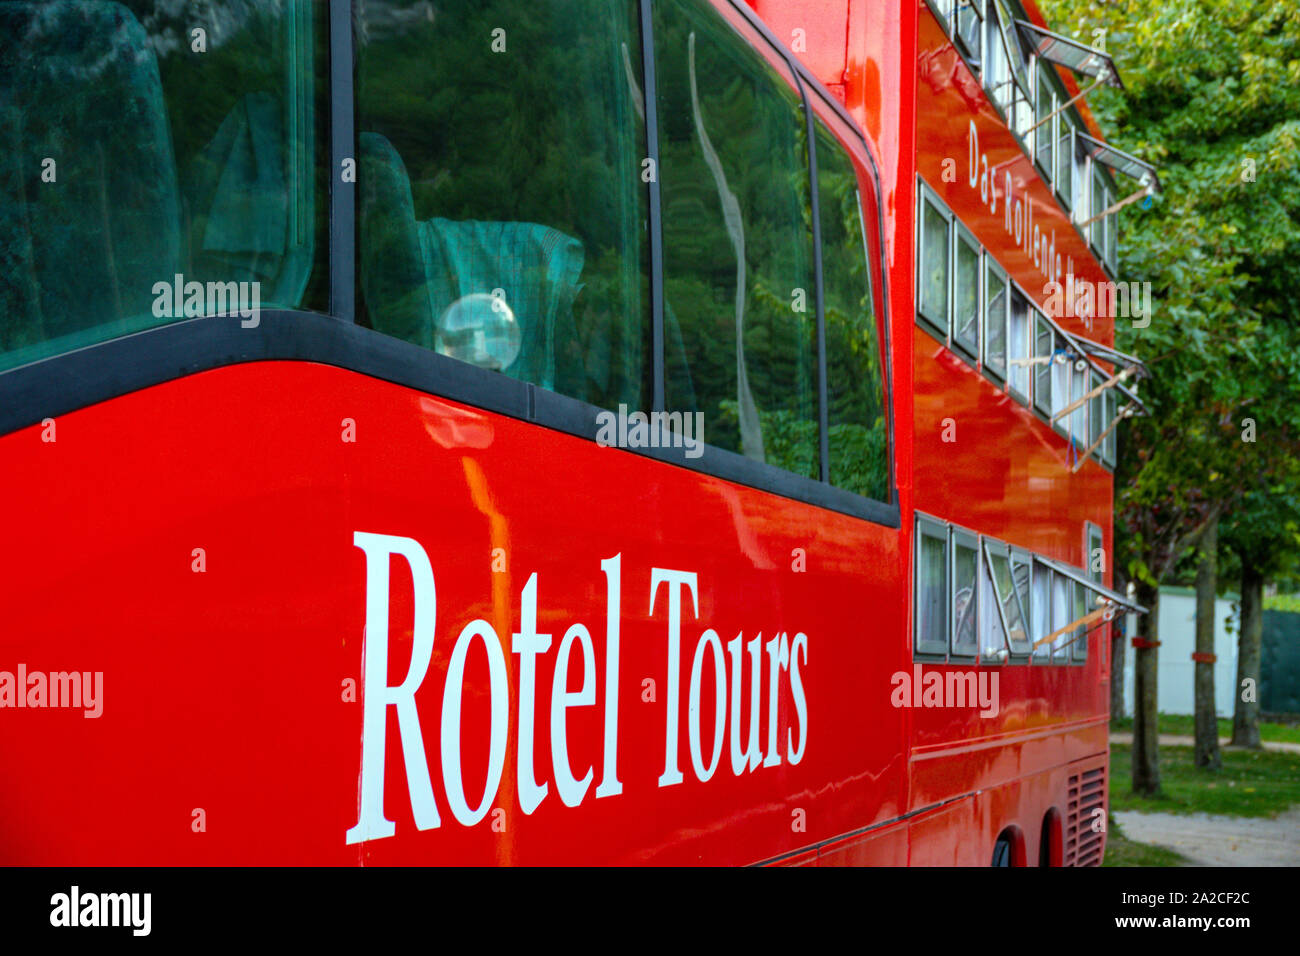 Huge red Mercedes bus, Rotel Tours, in the Italian Dolomites, Canazei, Italy Stock Photo